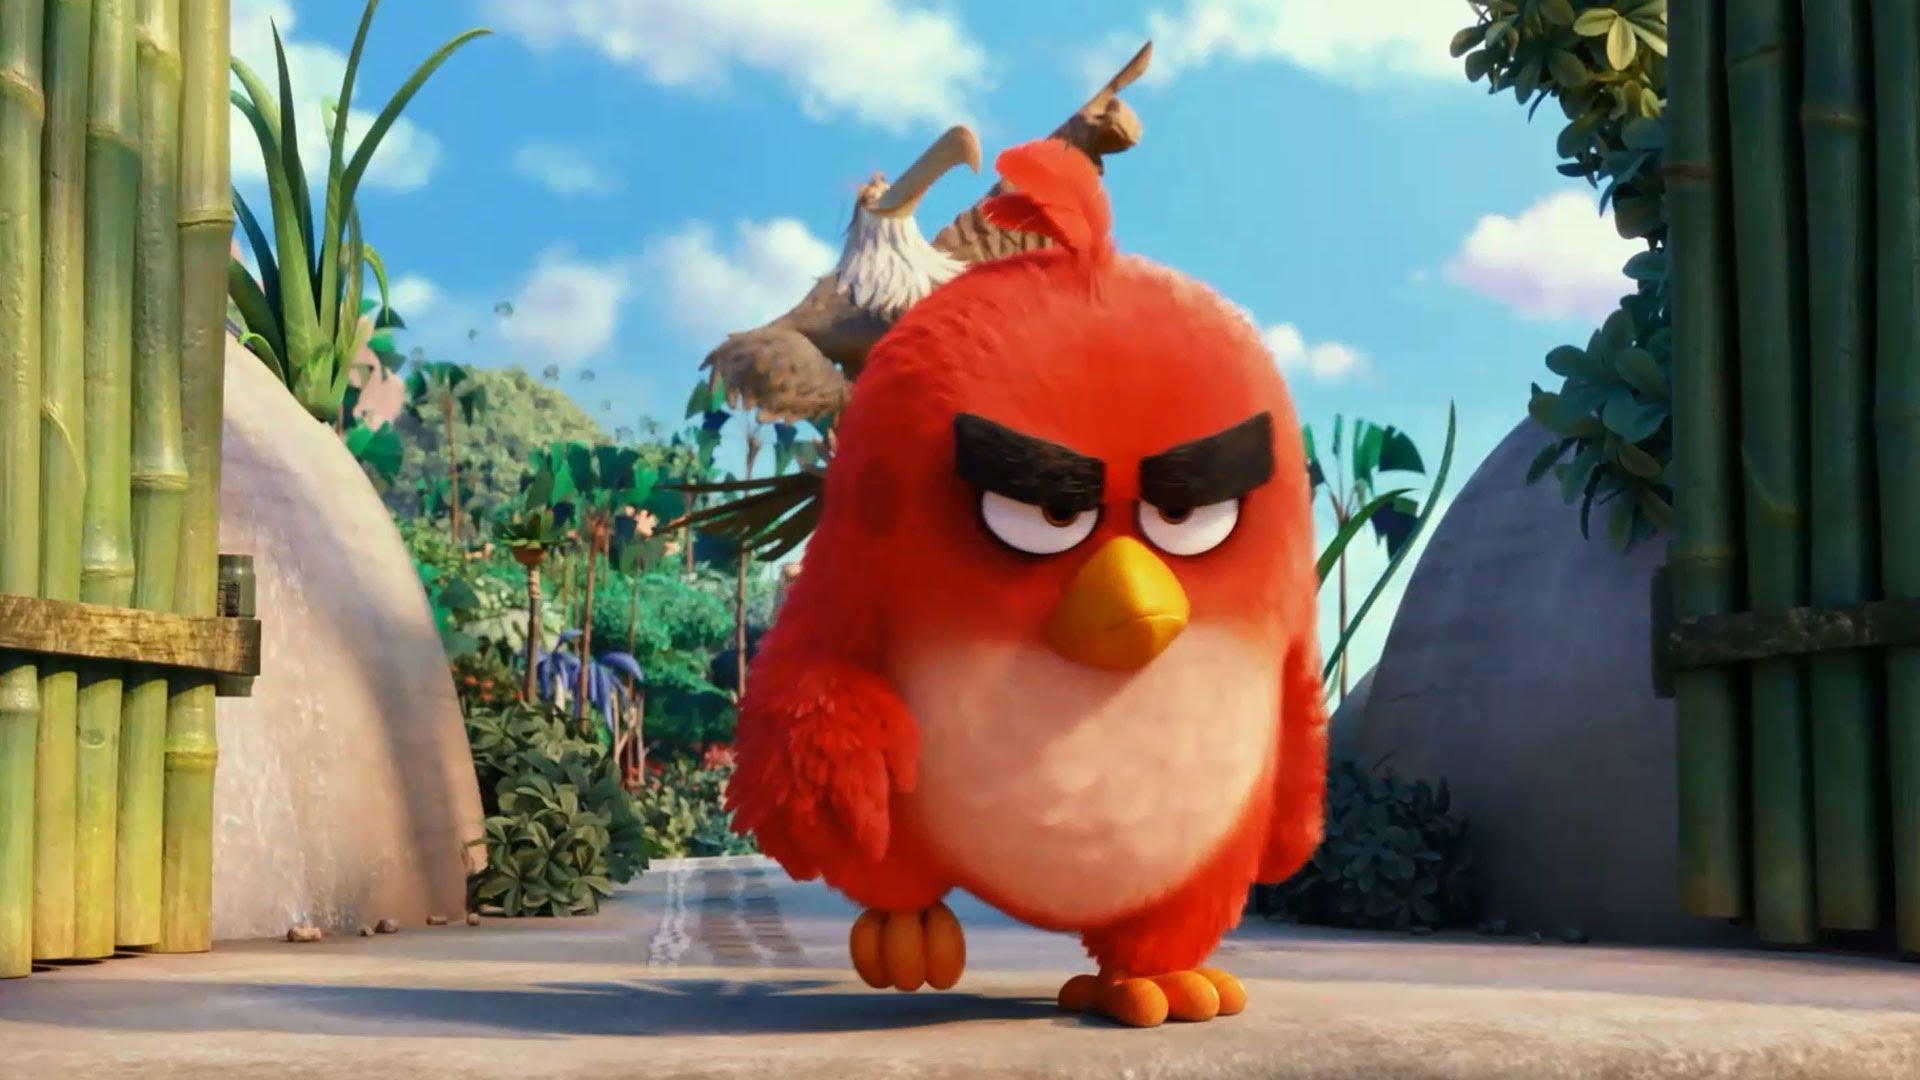 Is 'The Angry Birds Movie' Any Good?